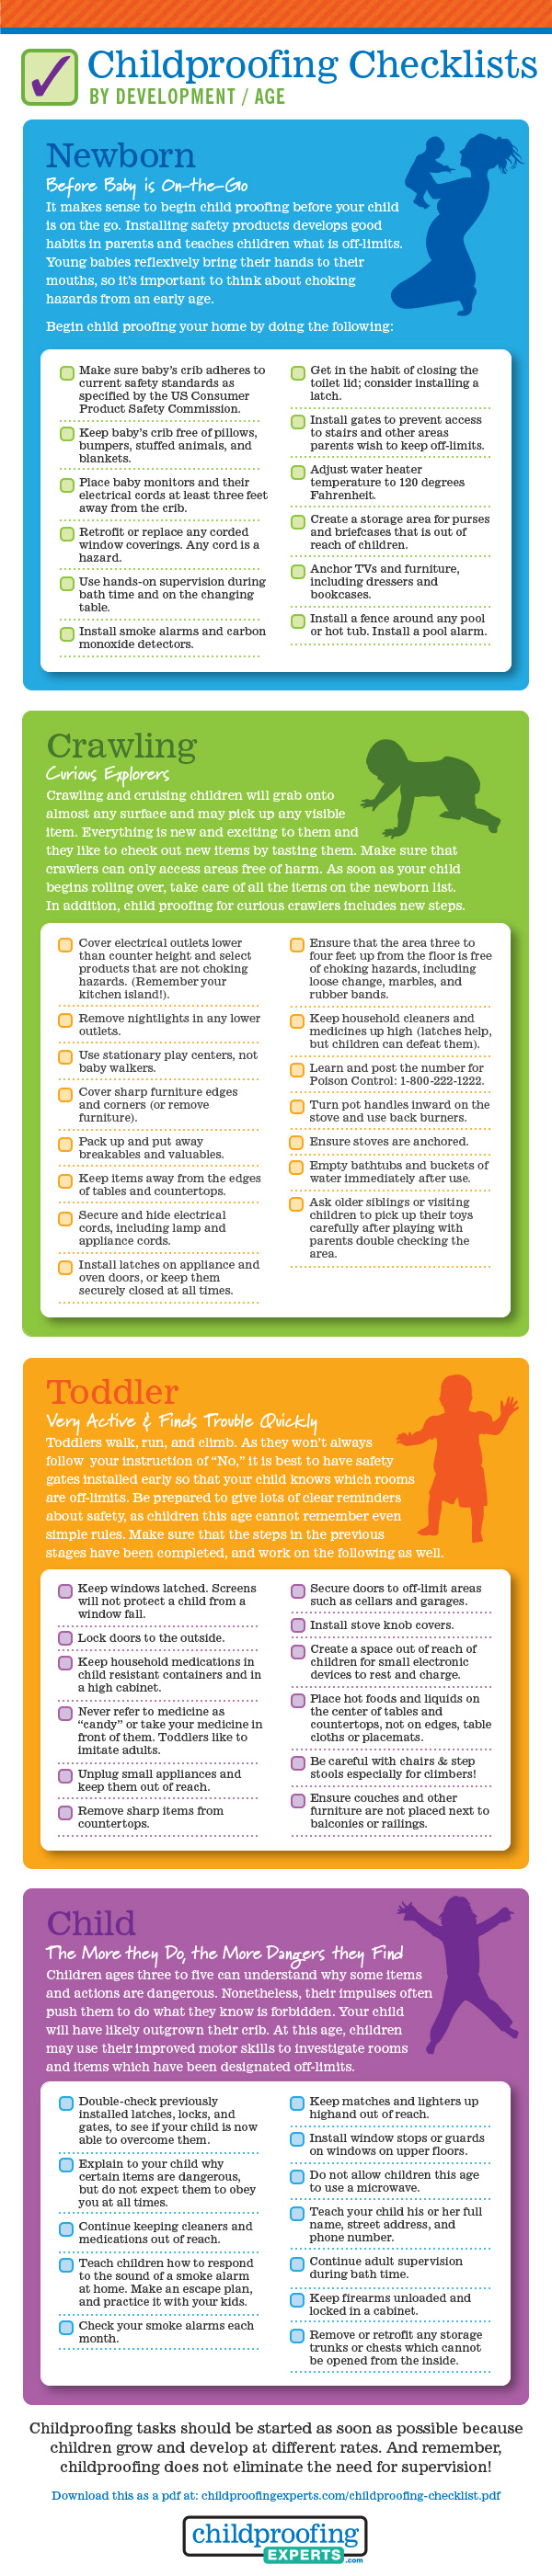 Childproofing Checklist by Developemnt / Age